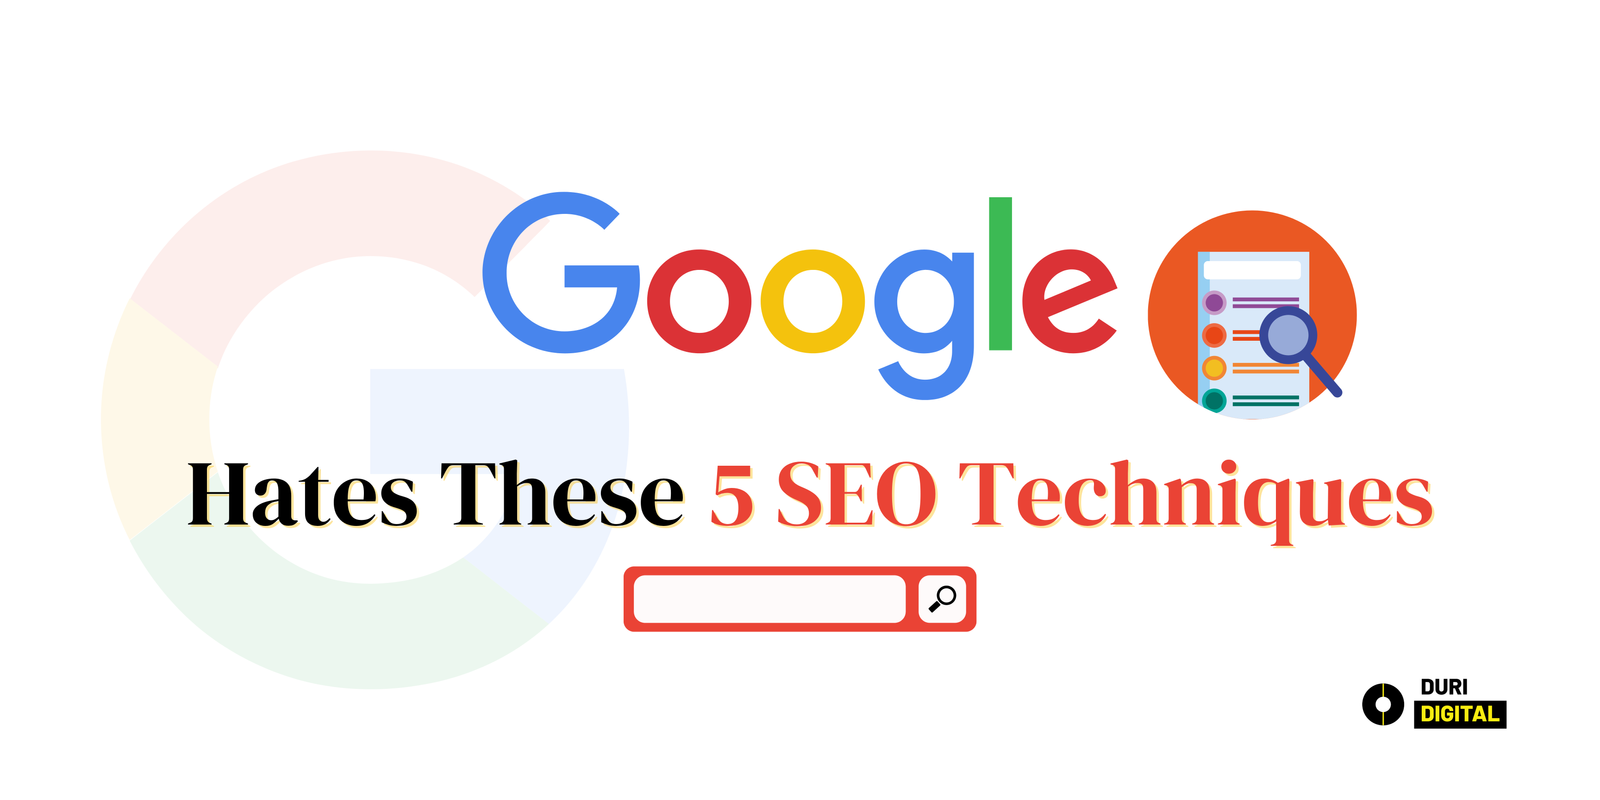 Google hates these 5 SEO techniques